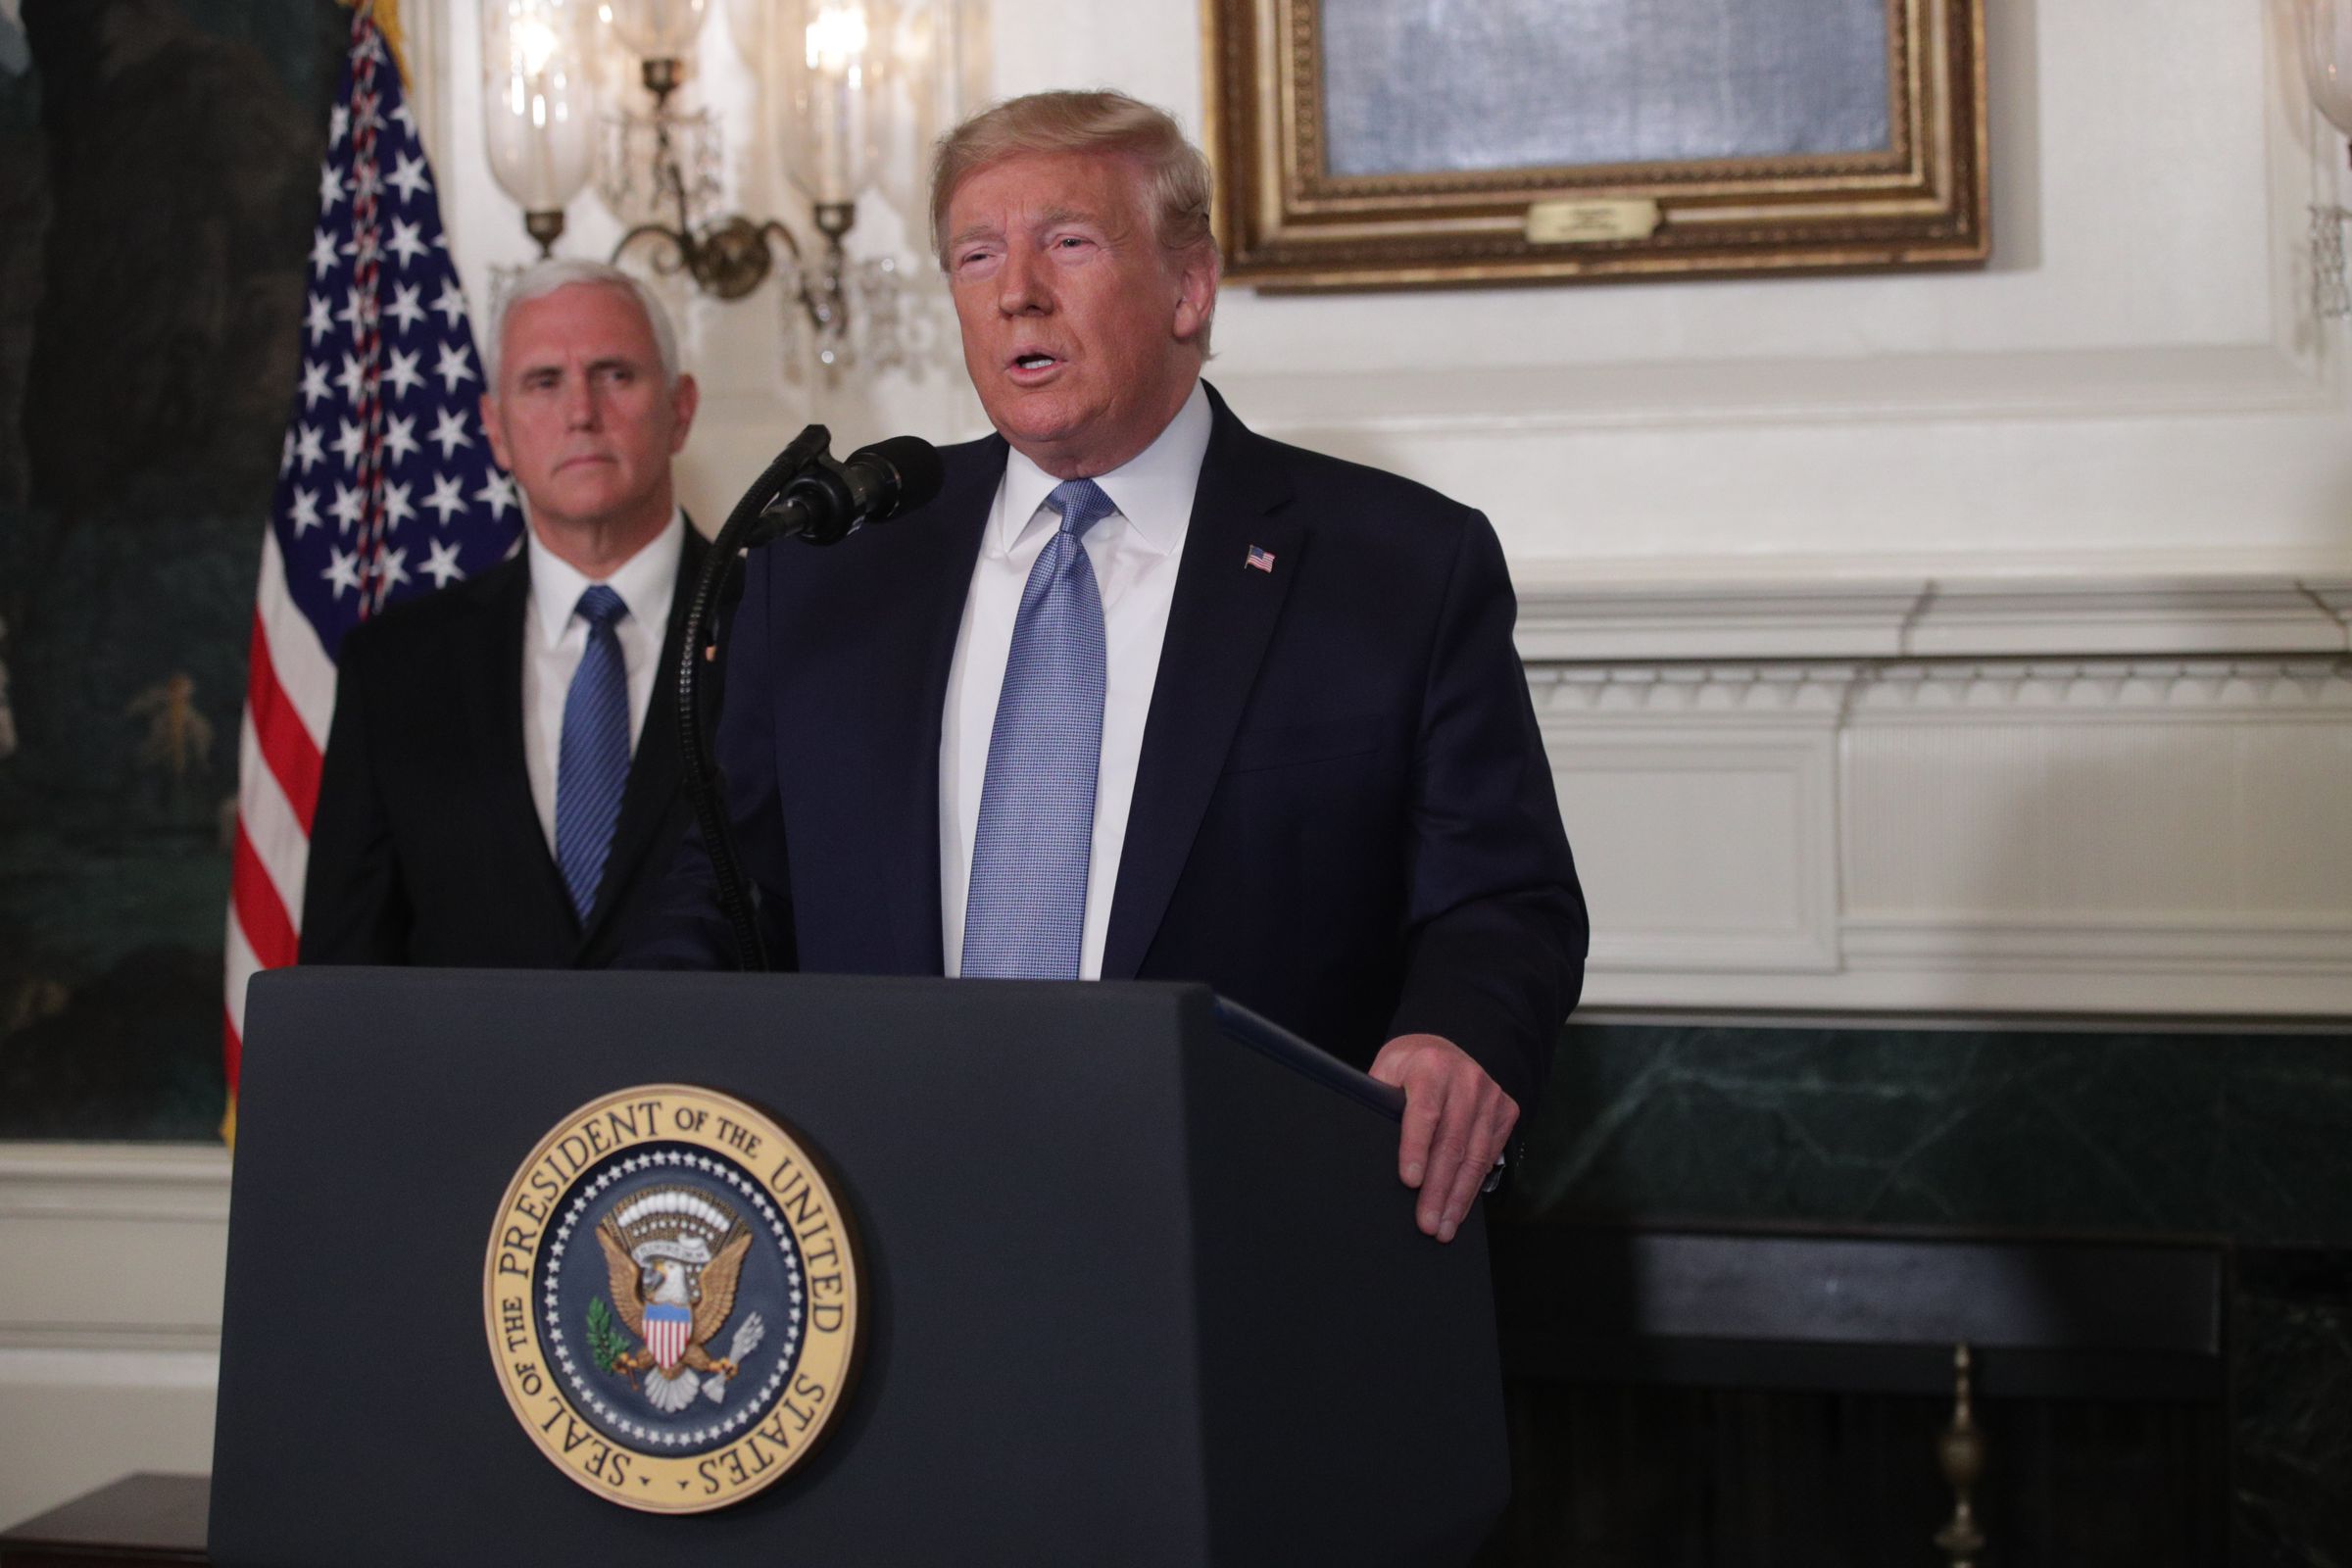 President Trump Delivers Remarks On The Weekend’s Mass Shootings